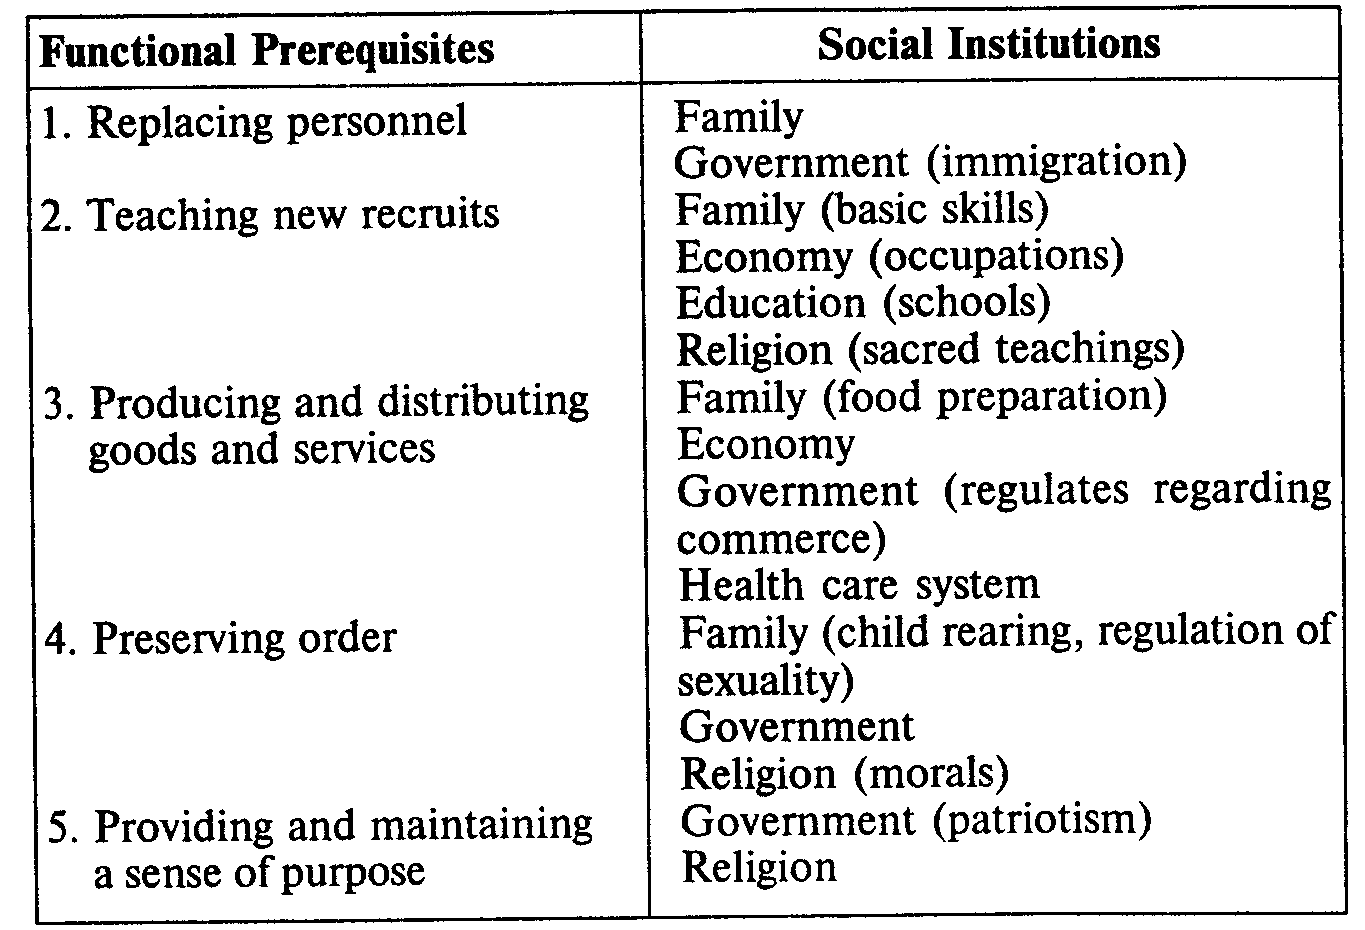 social institutions in a society provide